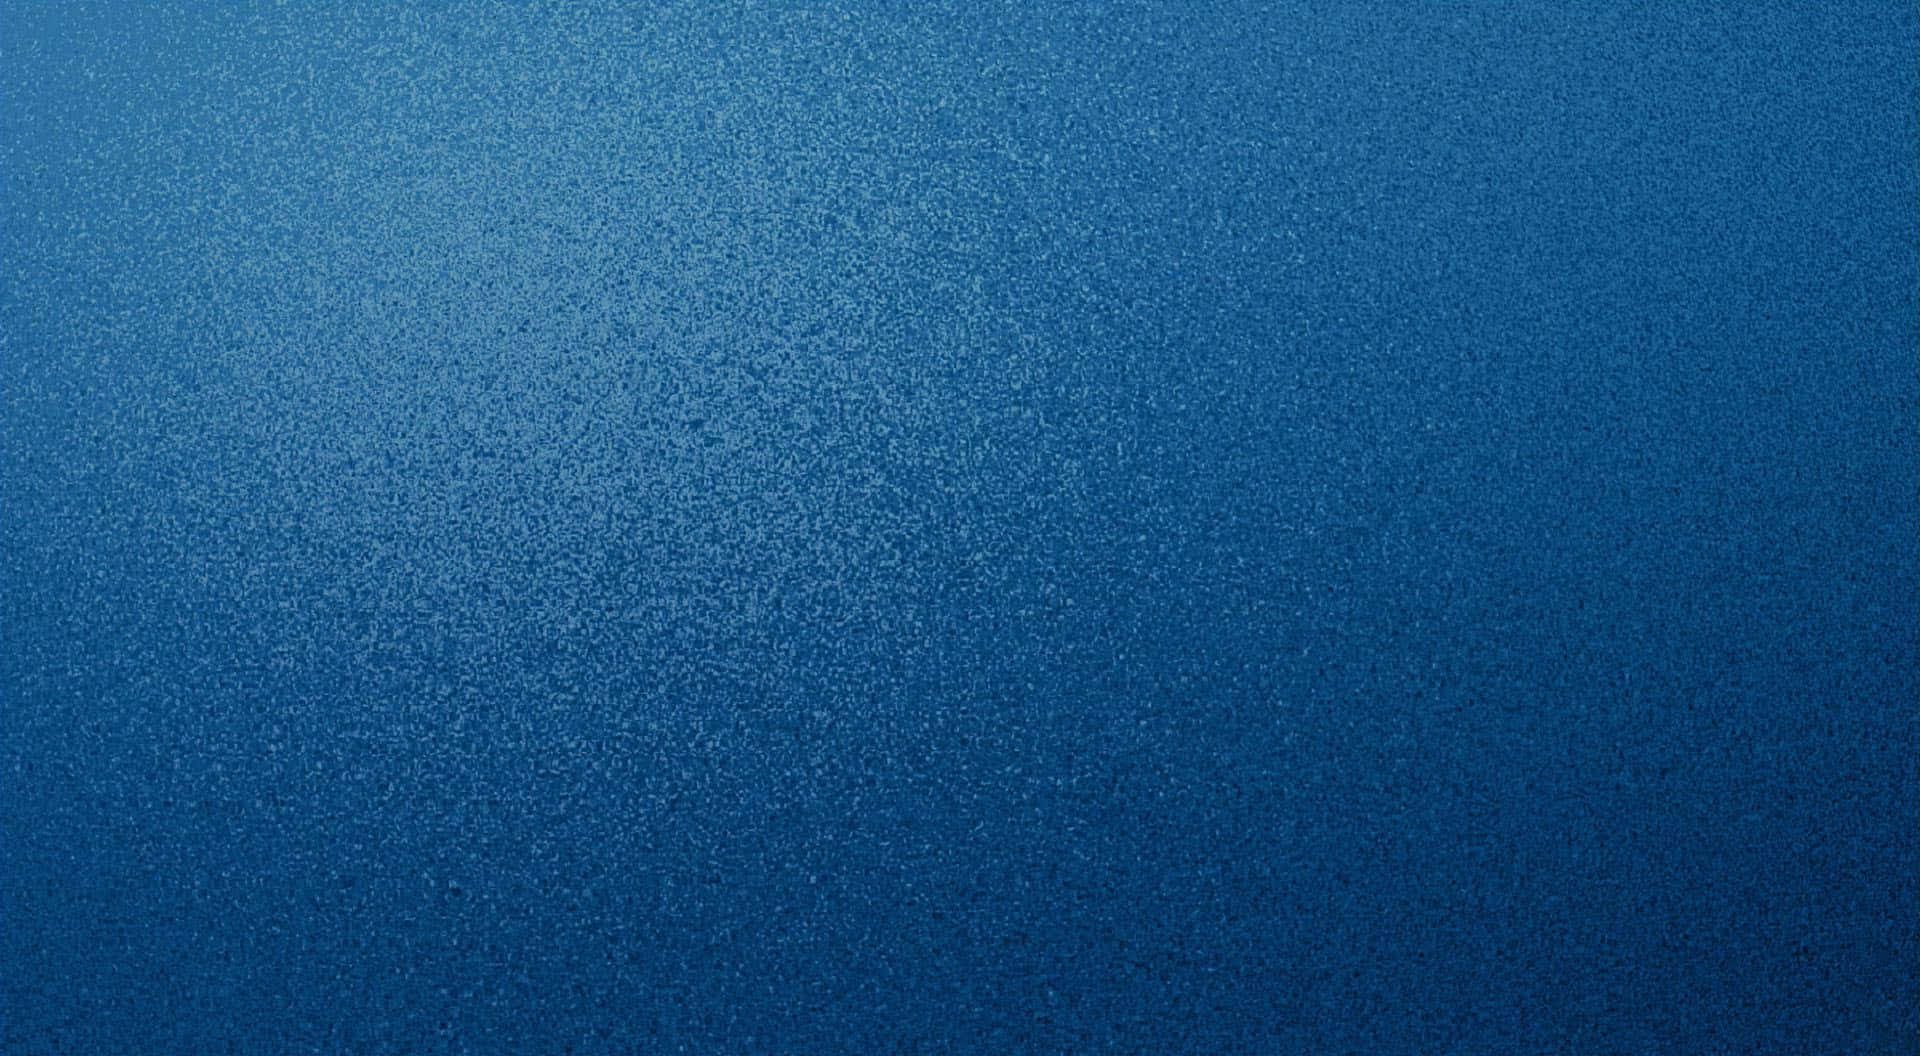 texture wallpaper android